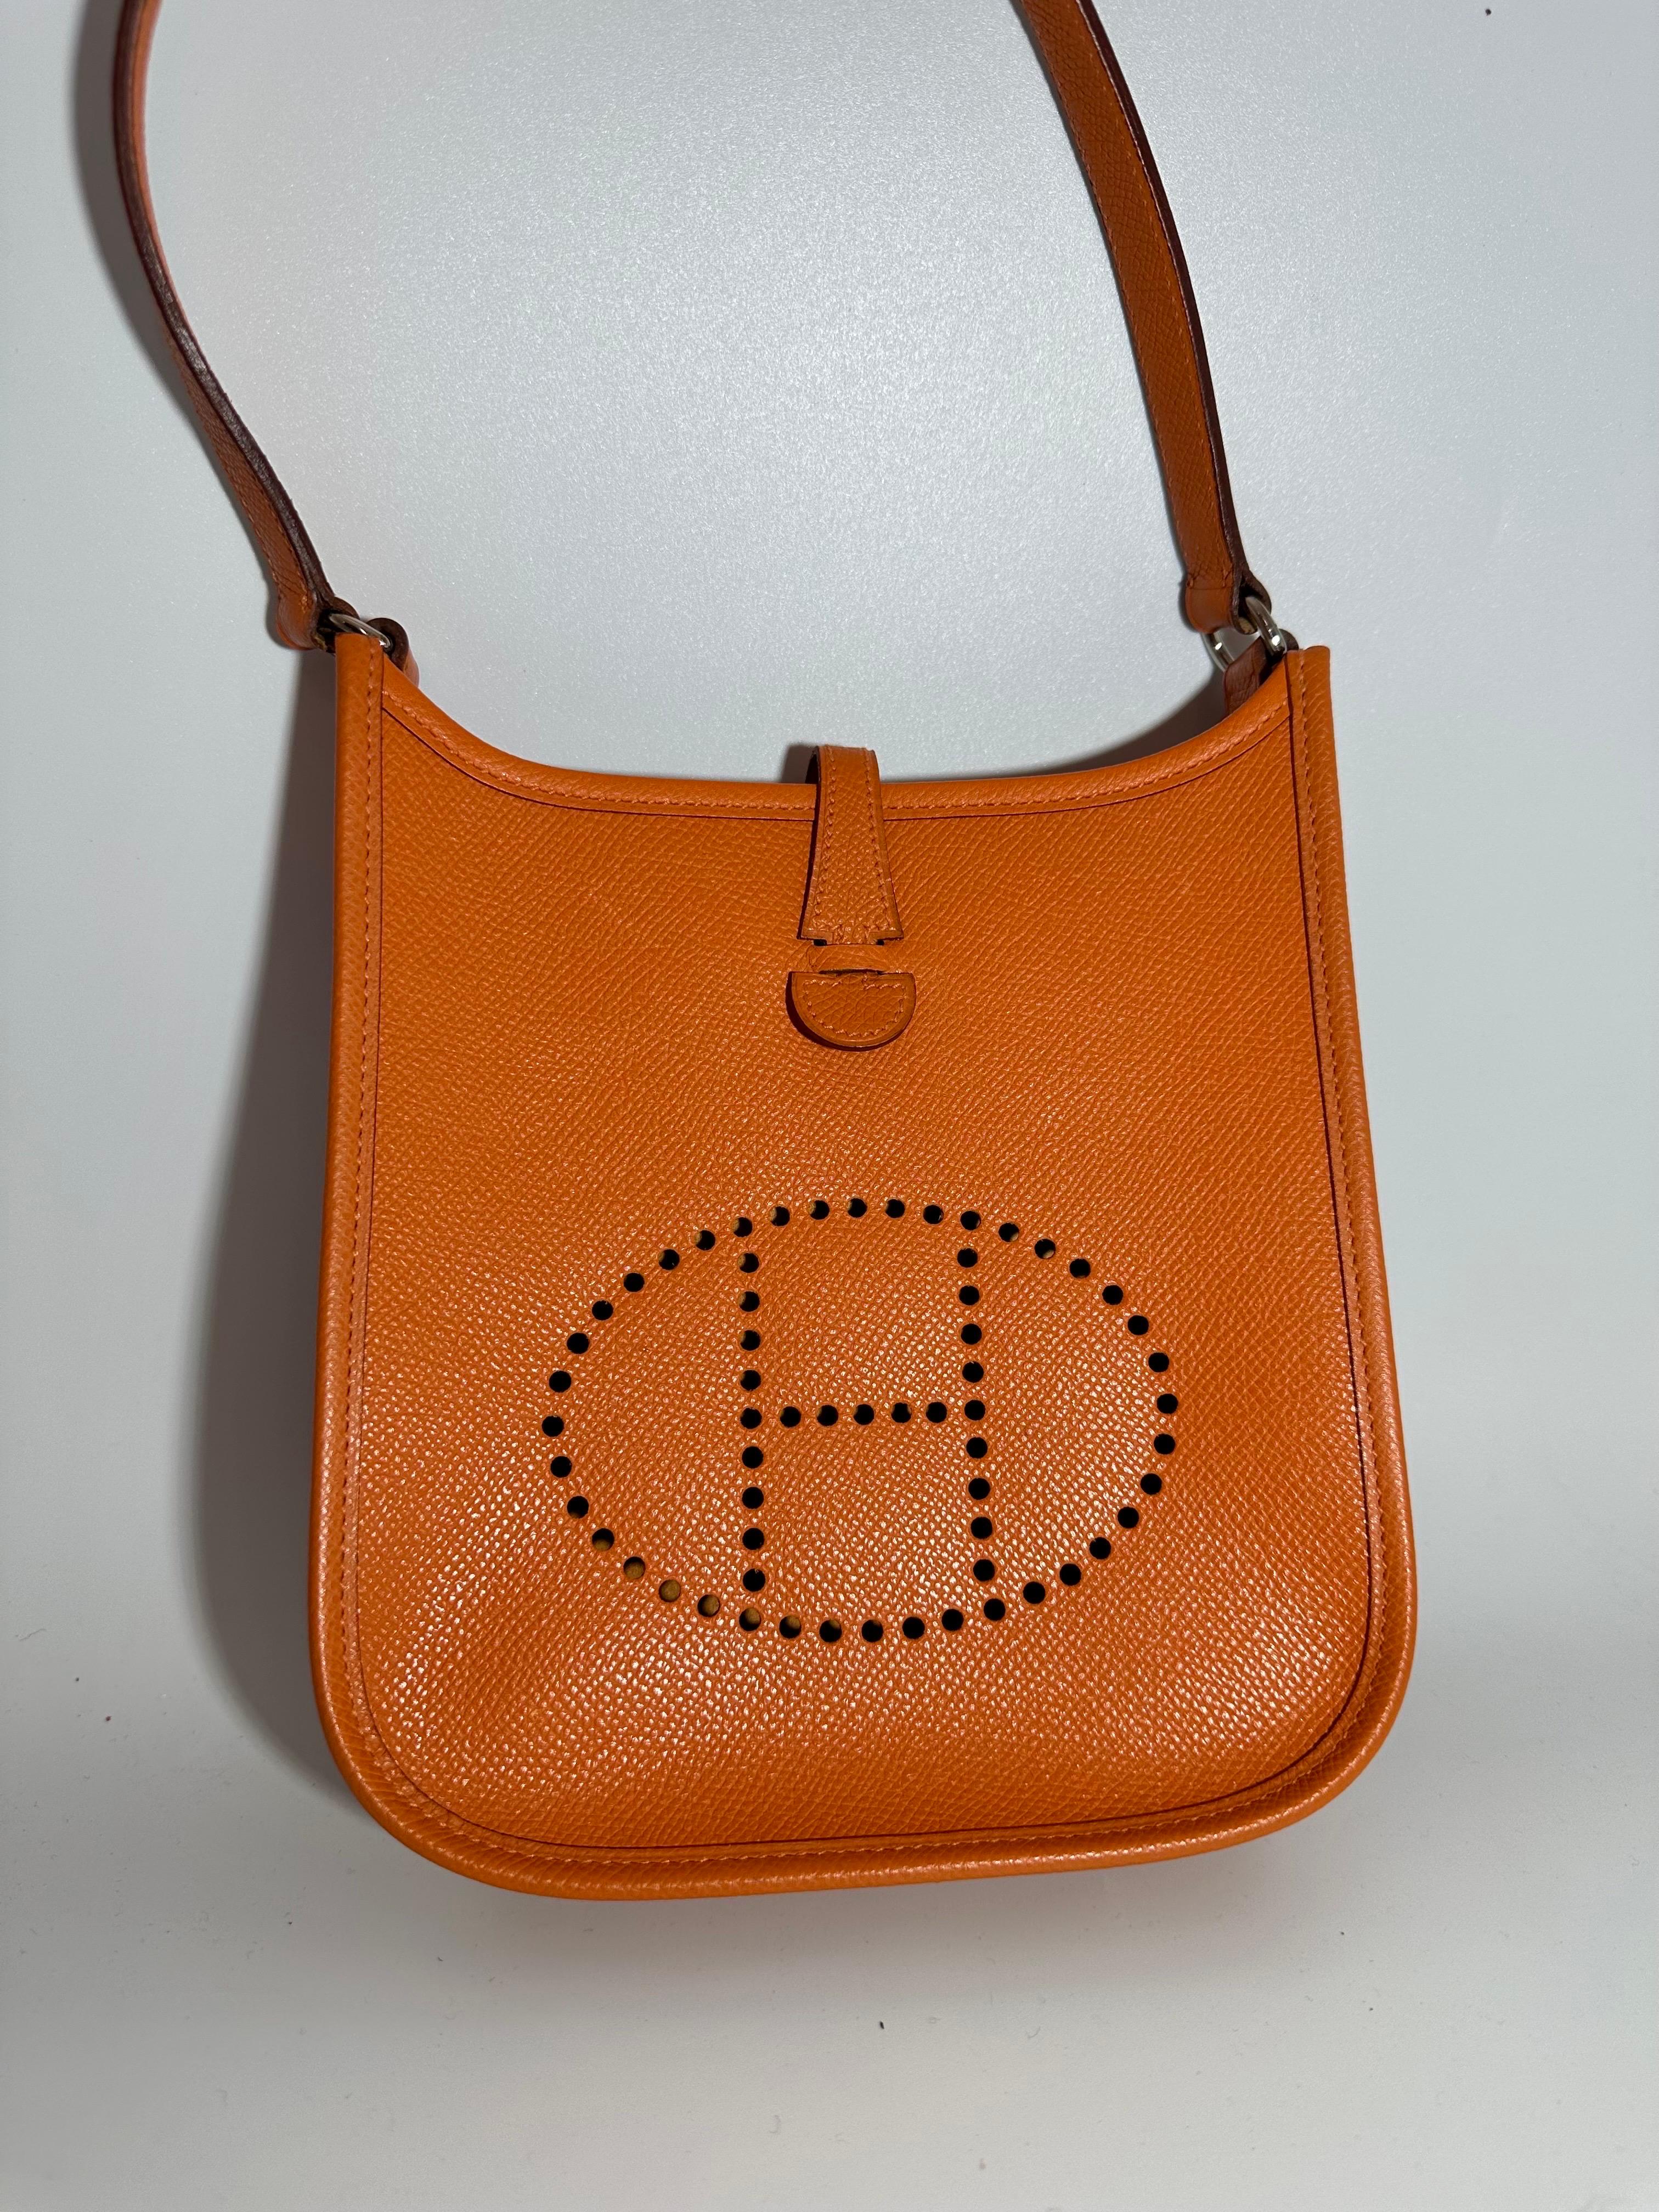 Hermès  Oranges Leather Small MINI Bag, Excellent condition like new
Small bags are more expensive then big Hermes bag.
Most desirable and Convenient Mini bag and most desirable color Orange
 Measurements: Height 7